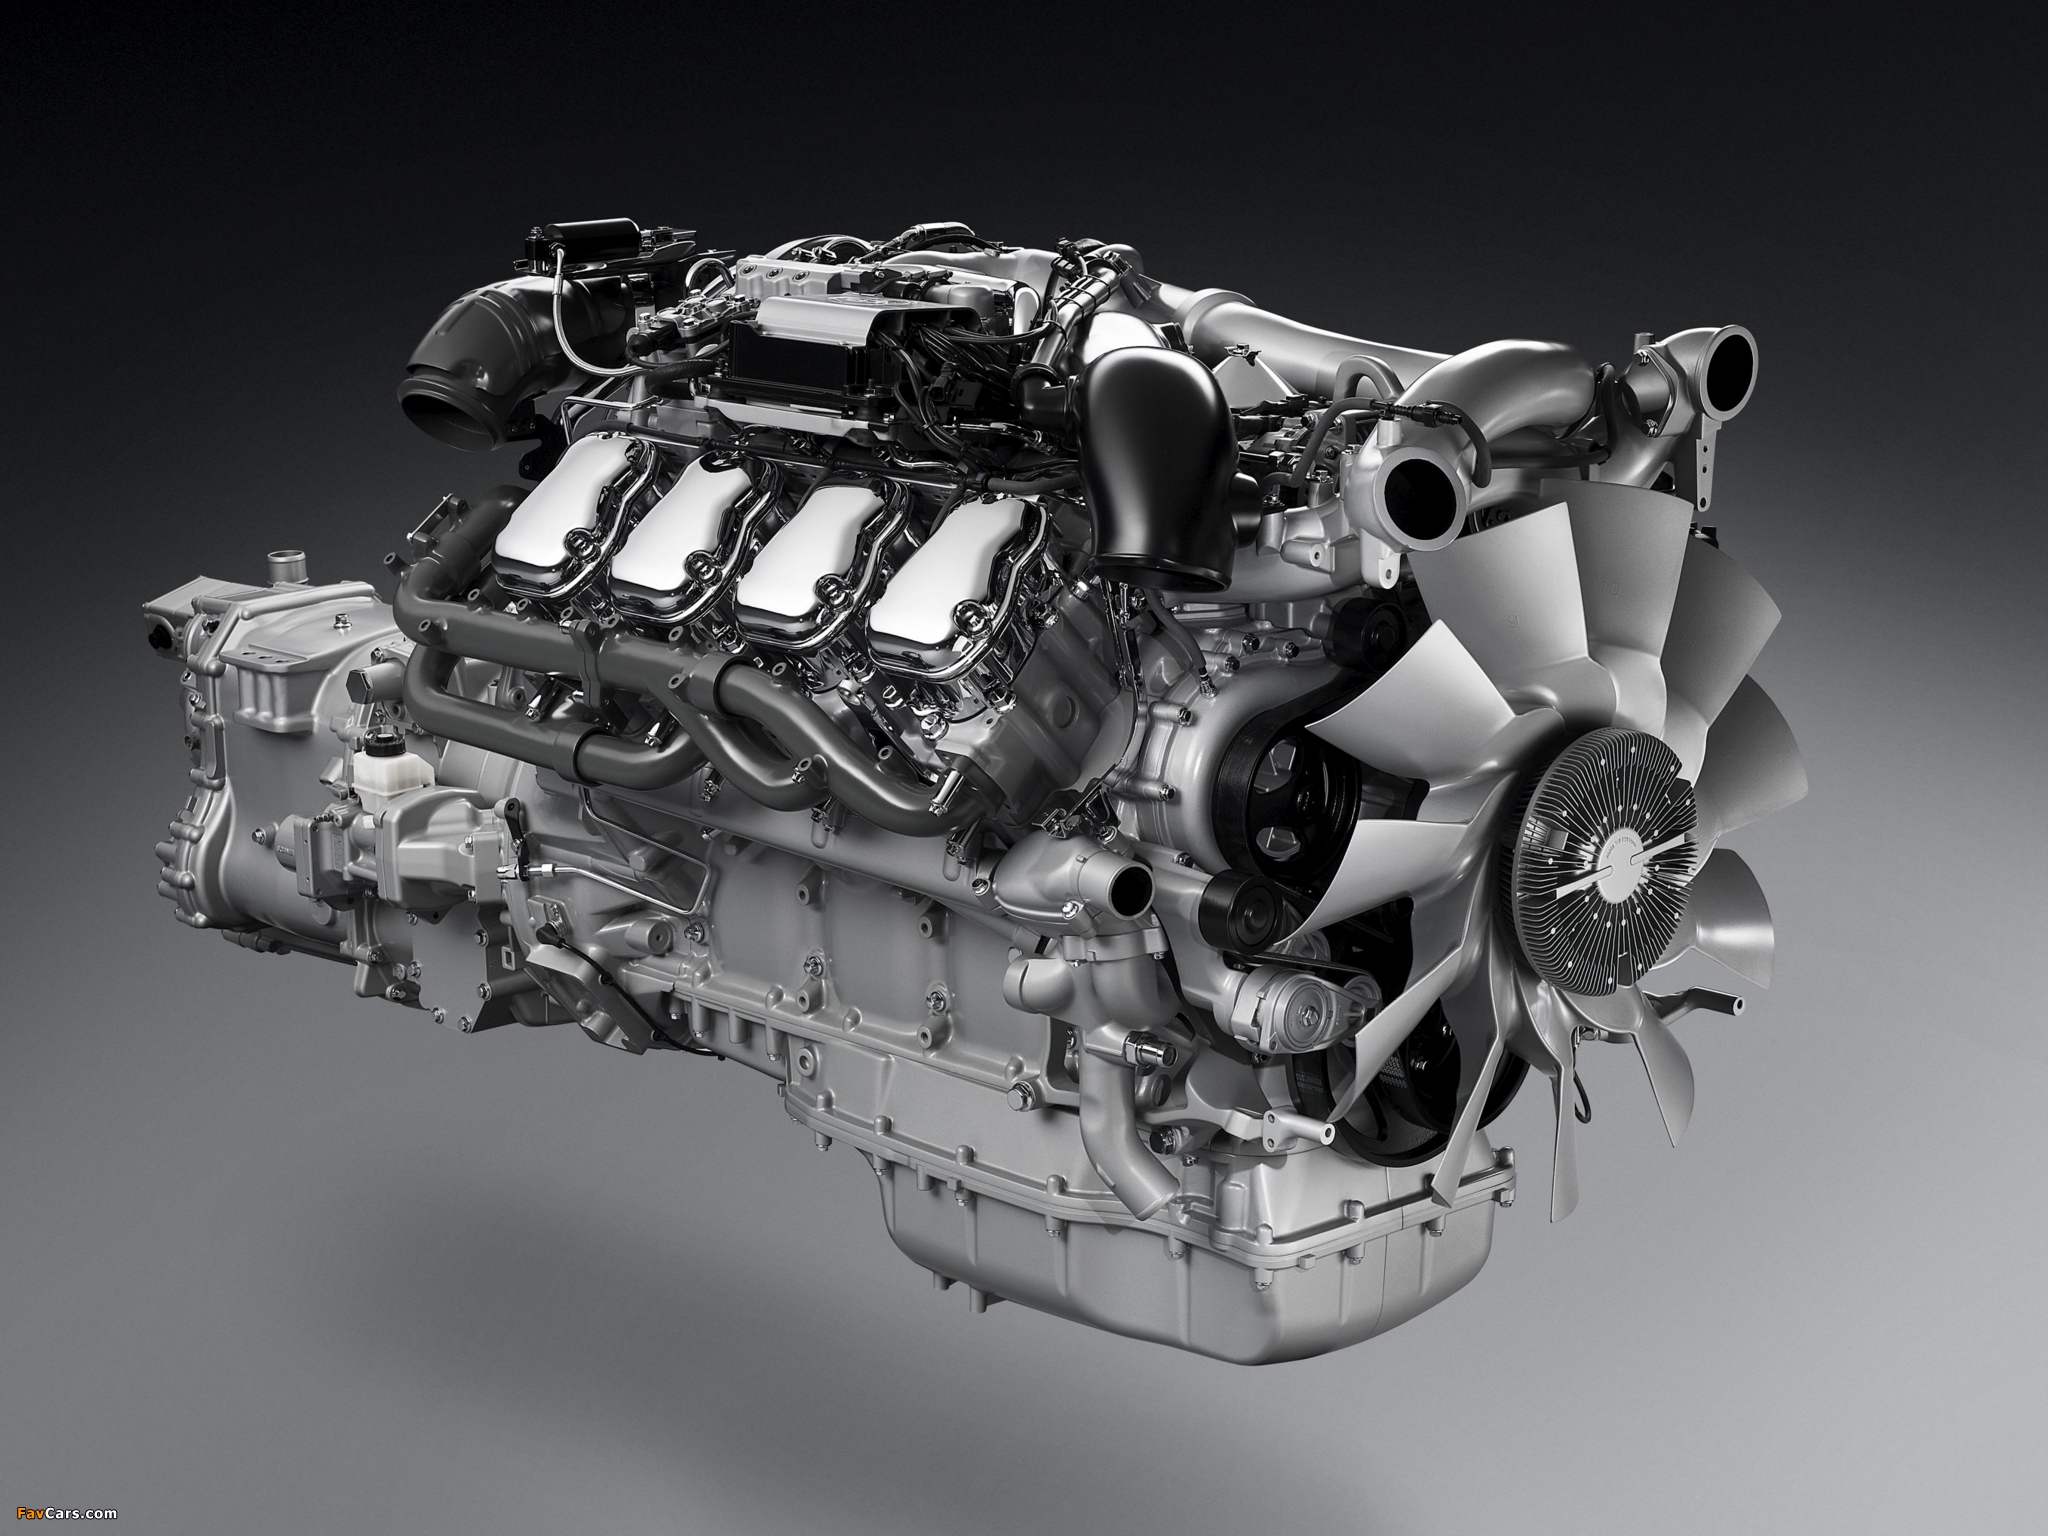 Images of Engines  Scania 730 hp 16.4-litre Euro 5 (2048 x 1536)